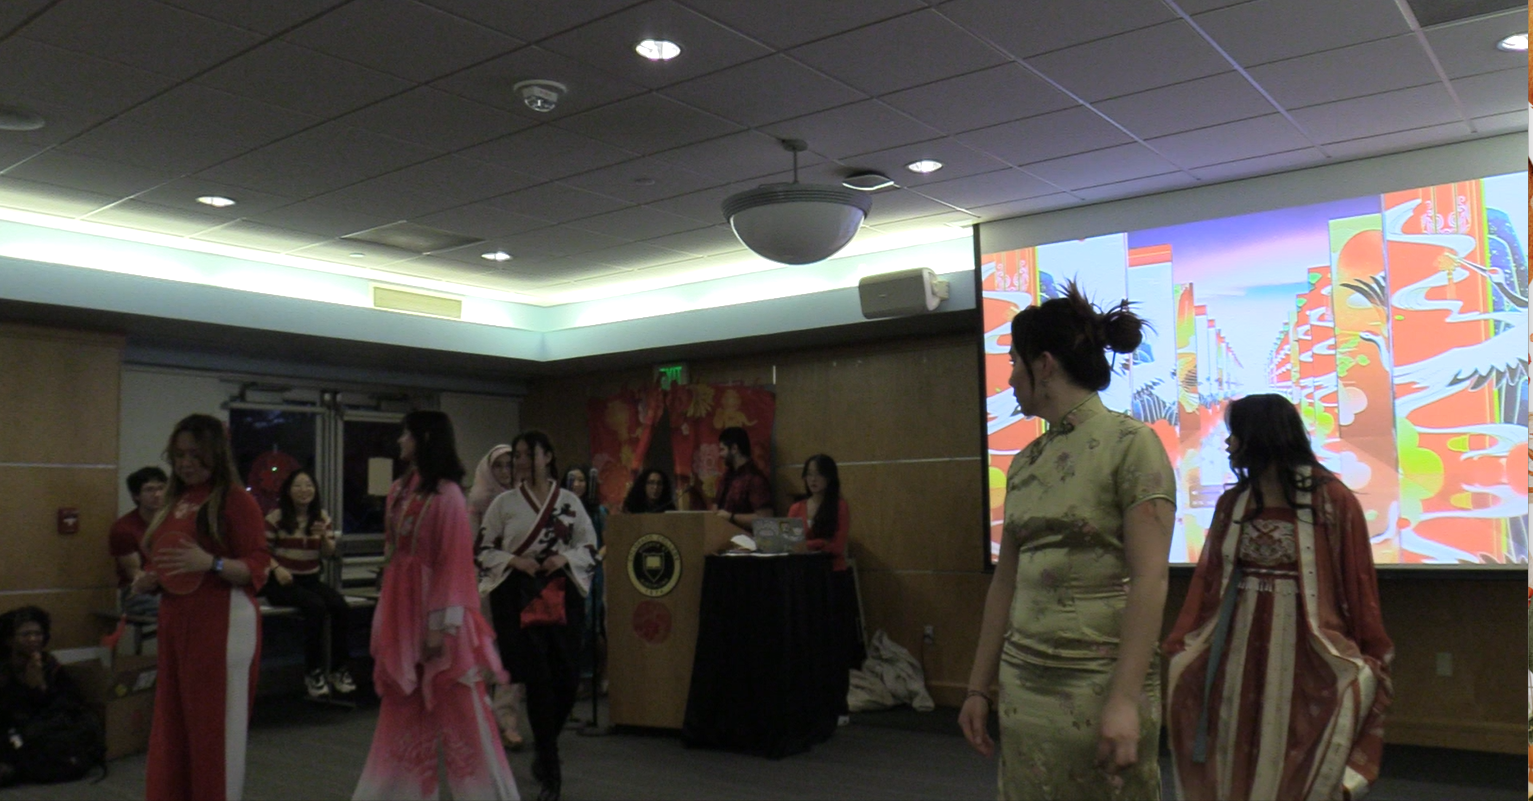 Traditional Chinese Fashion Show: CN201 of CC in Asia Program led by Ella <span class="cc-gallery-credit"></span>